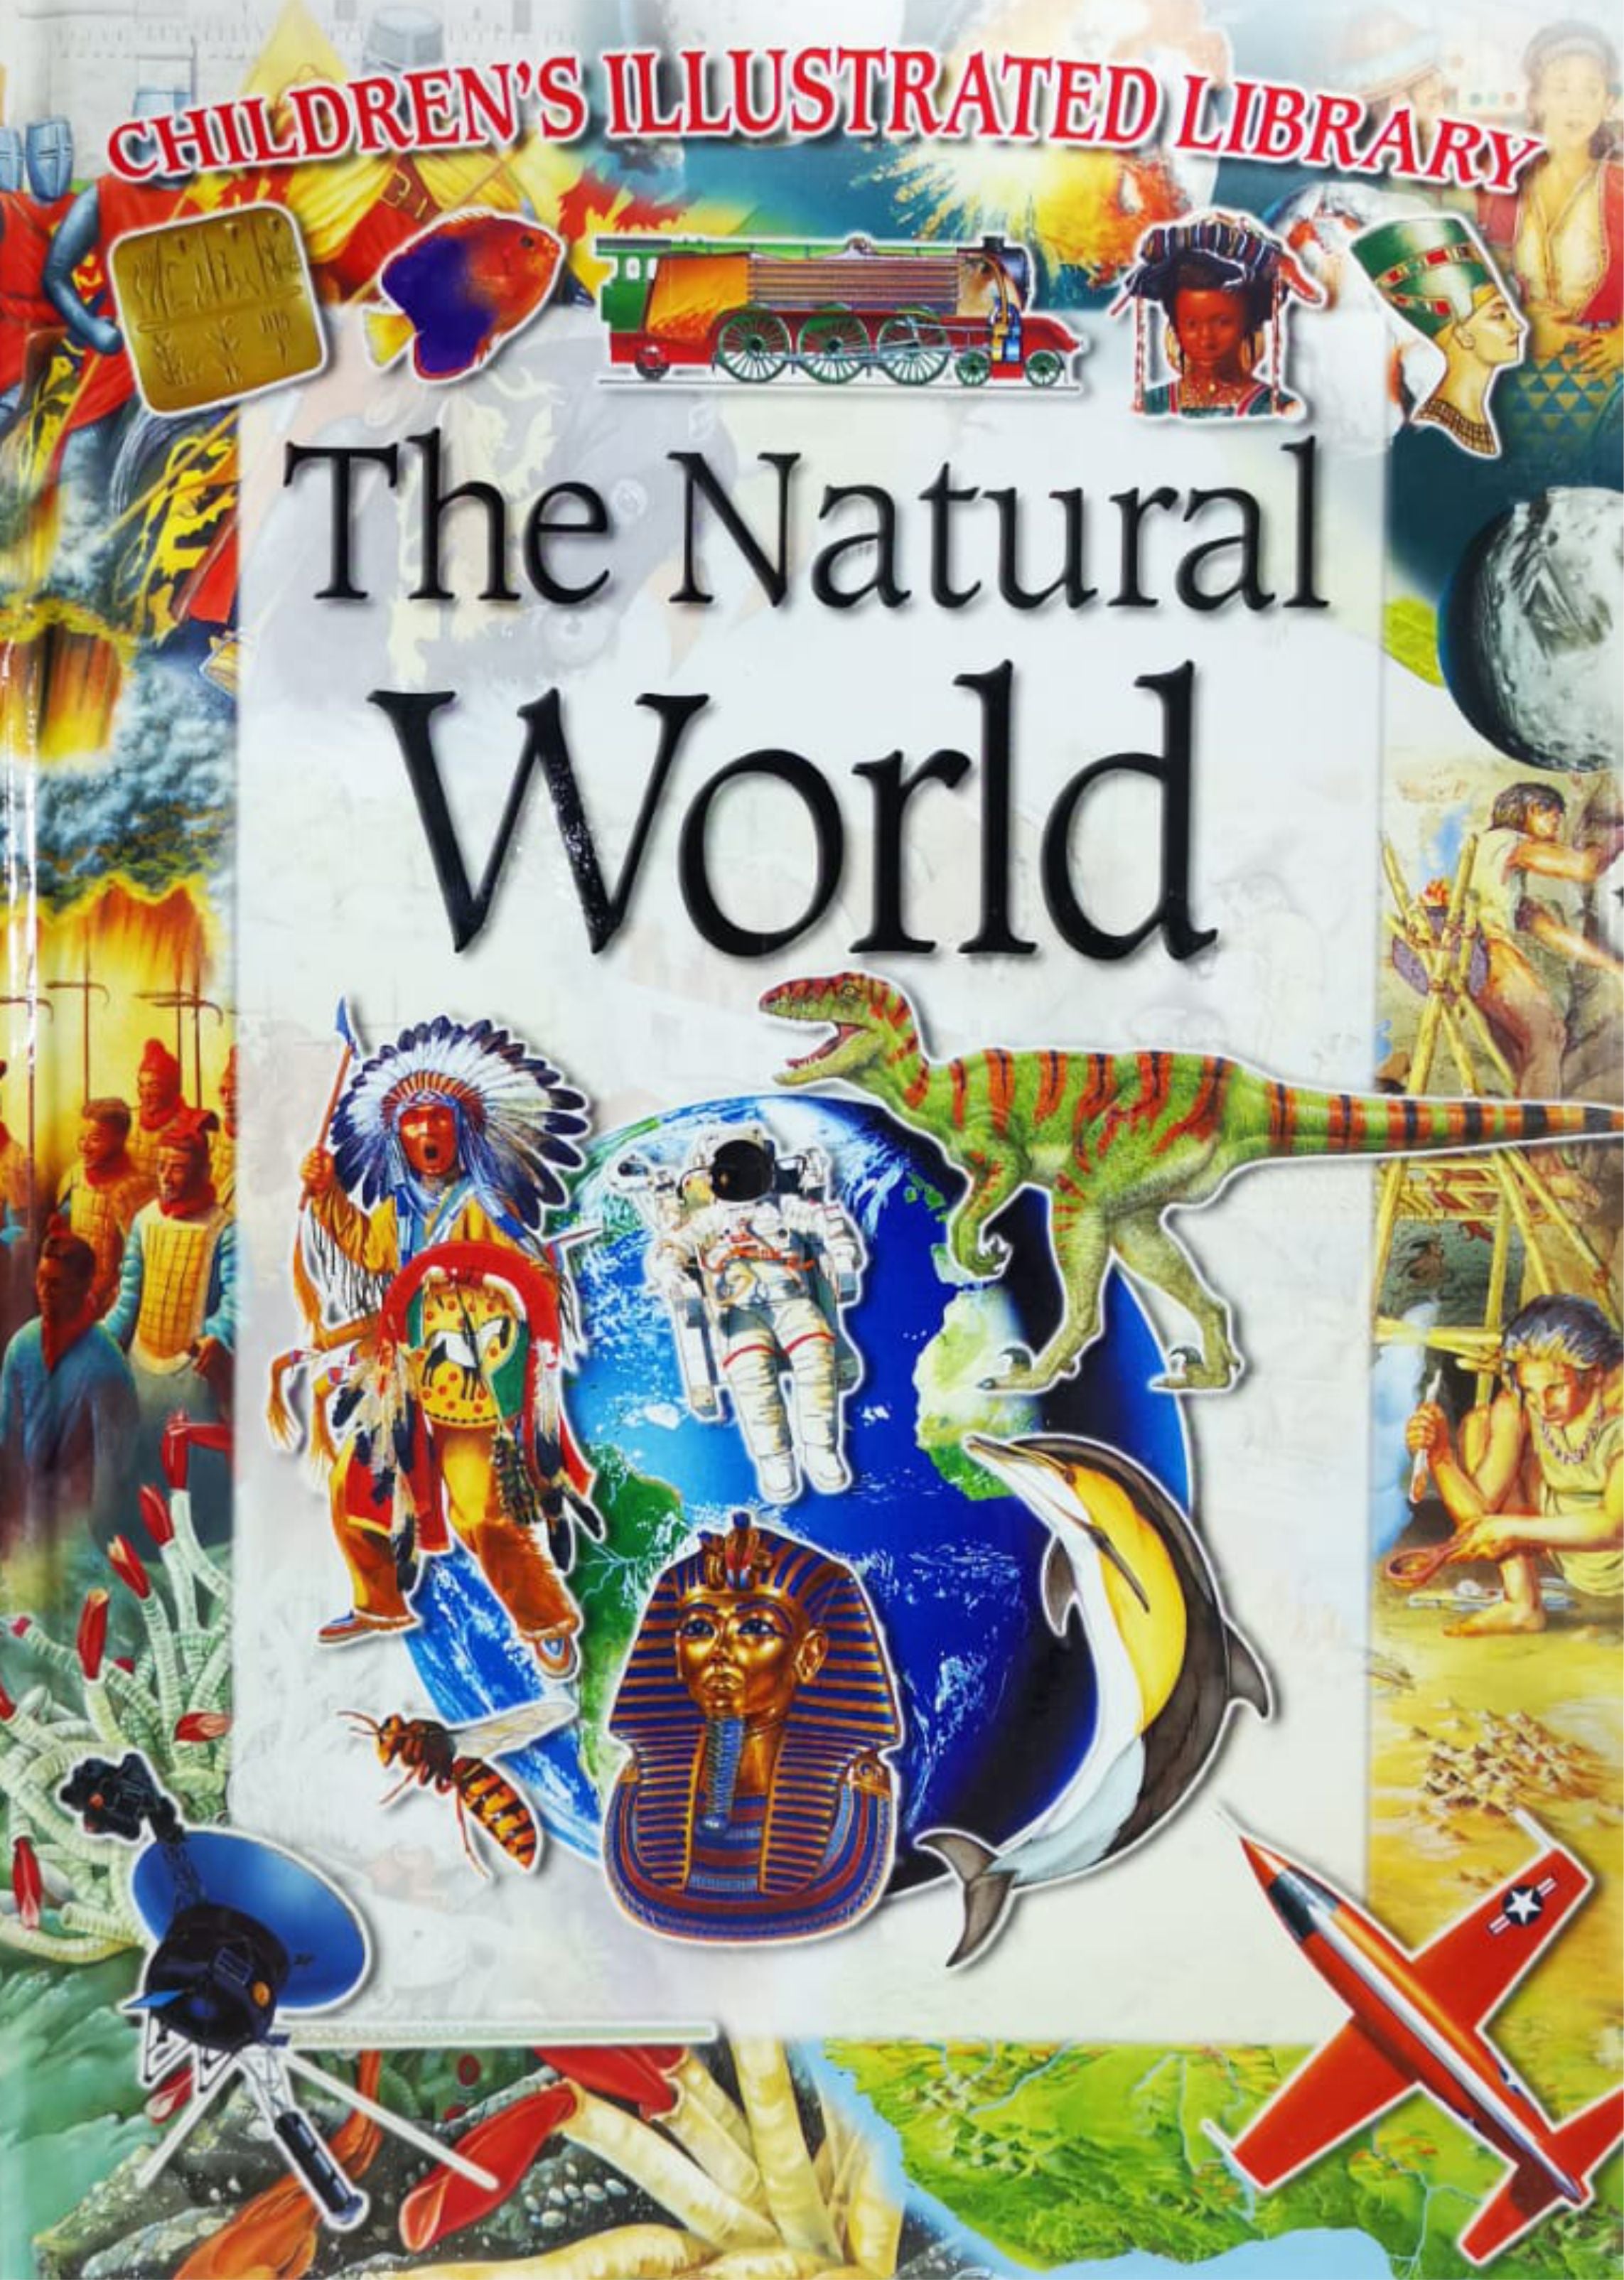 The Natural World (Children's Illustrated Library)